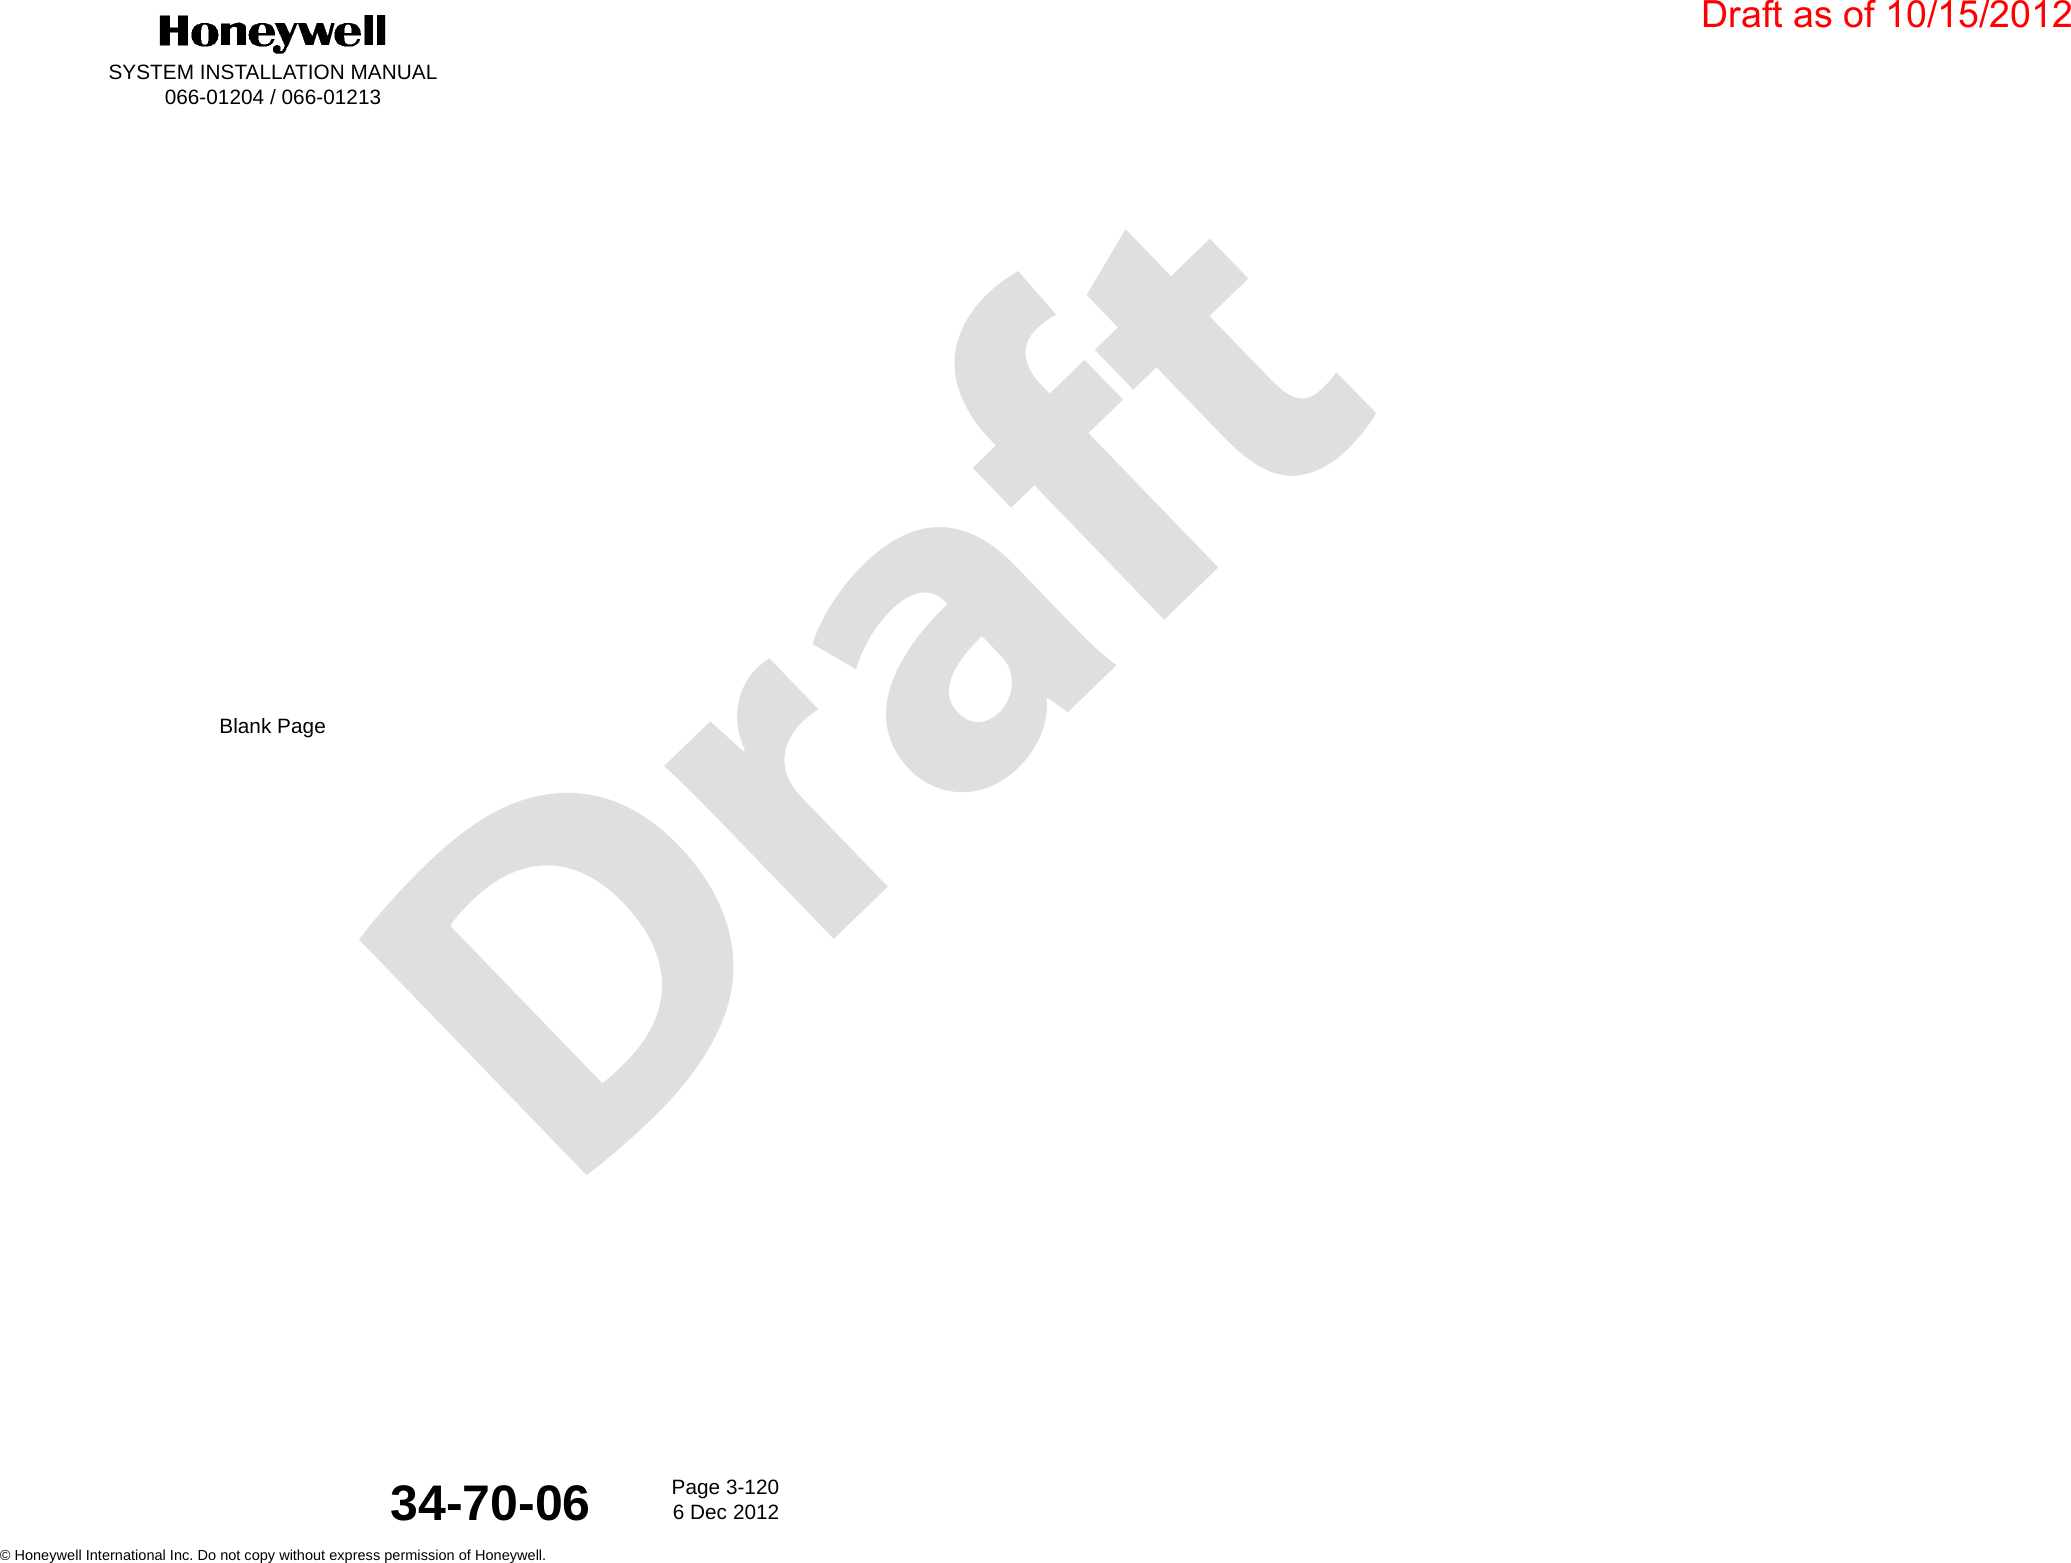 DraftSYSTEM INSTALLATION MANUAL066-01204 / 066-01213Page 3-1206 Dec 2012© Honeywell International Inc. Do not copy without express permission of Honeywell.34-70-06Blank PageDraft as of 10/15/2012